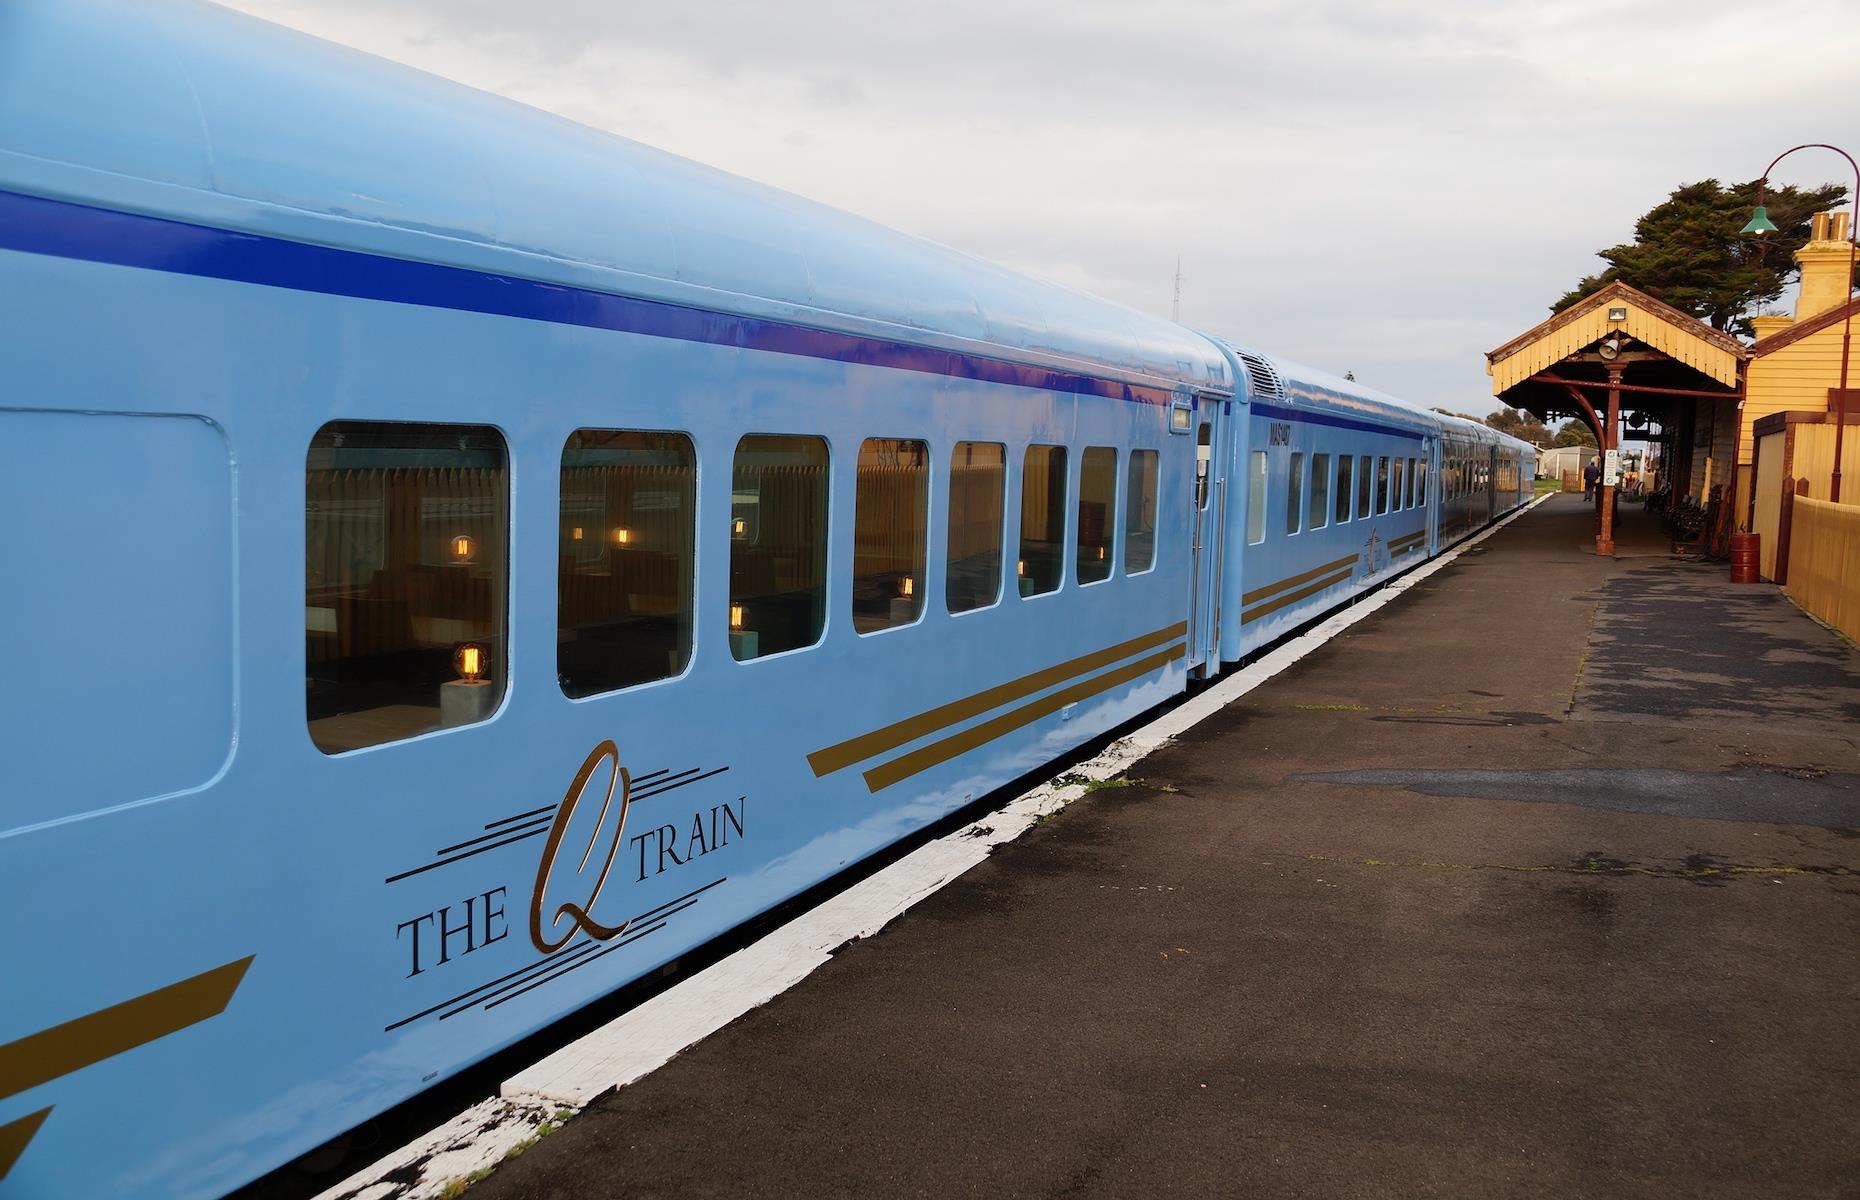 <p>All aboard, foodies: Victoria’s <a href="https://www.theqtrain.com.au">Q Train</a> is quite the hot culinary ticket. Travelling along the 10 mile (16km) Bellarine Railway from the historic Drysdale station, this railway journey is all about drinking in the views as you savor wines and produce from the bucolic Bellarine Peninsula. Over a luxurious three-hour trip between Drysdale and Queenscliff, passengers feast on a six-course degustation menu while seated in refurbished rail dining cars.</p>  <p><a href="http://bit.ly/3roL4wv"><strong>Love this? Follow our Facebook page for more train-travel inspiration</strong></a></p>